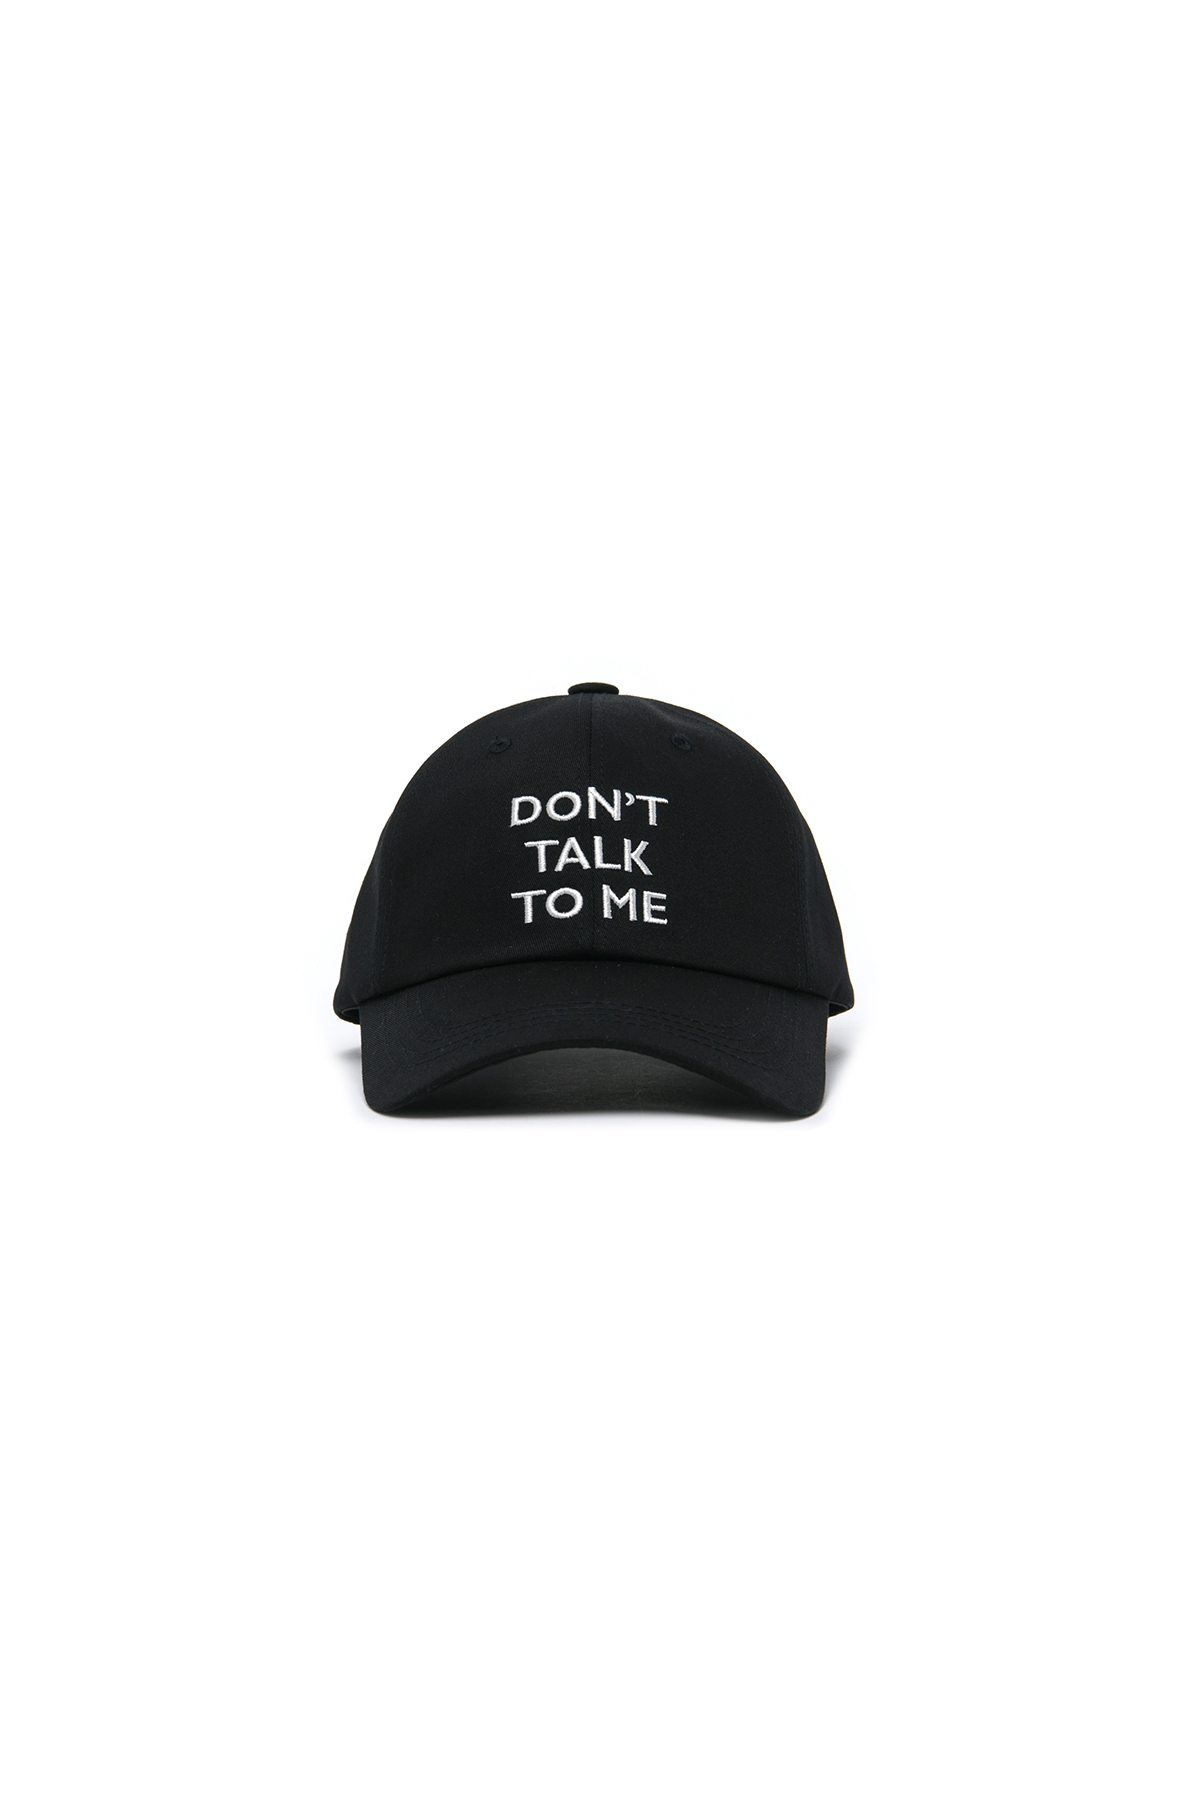 DONT TALK TO ME EMBROIDERED BALL CAP BLACK